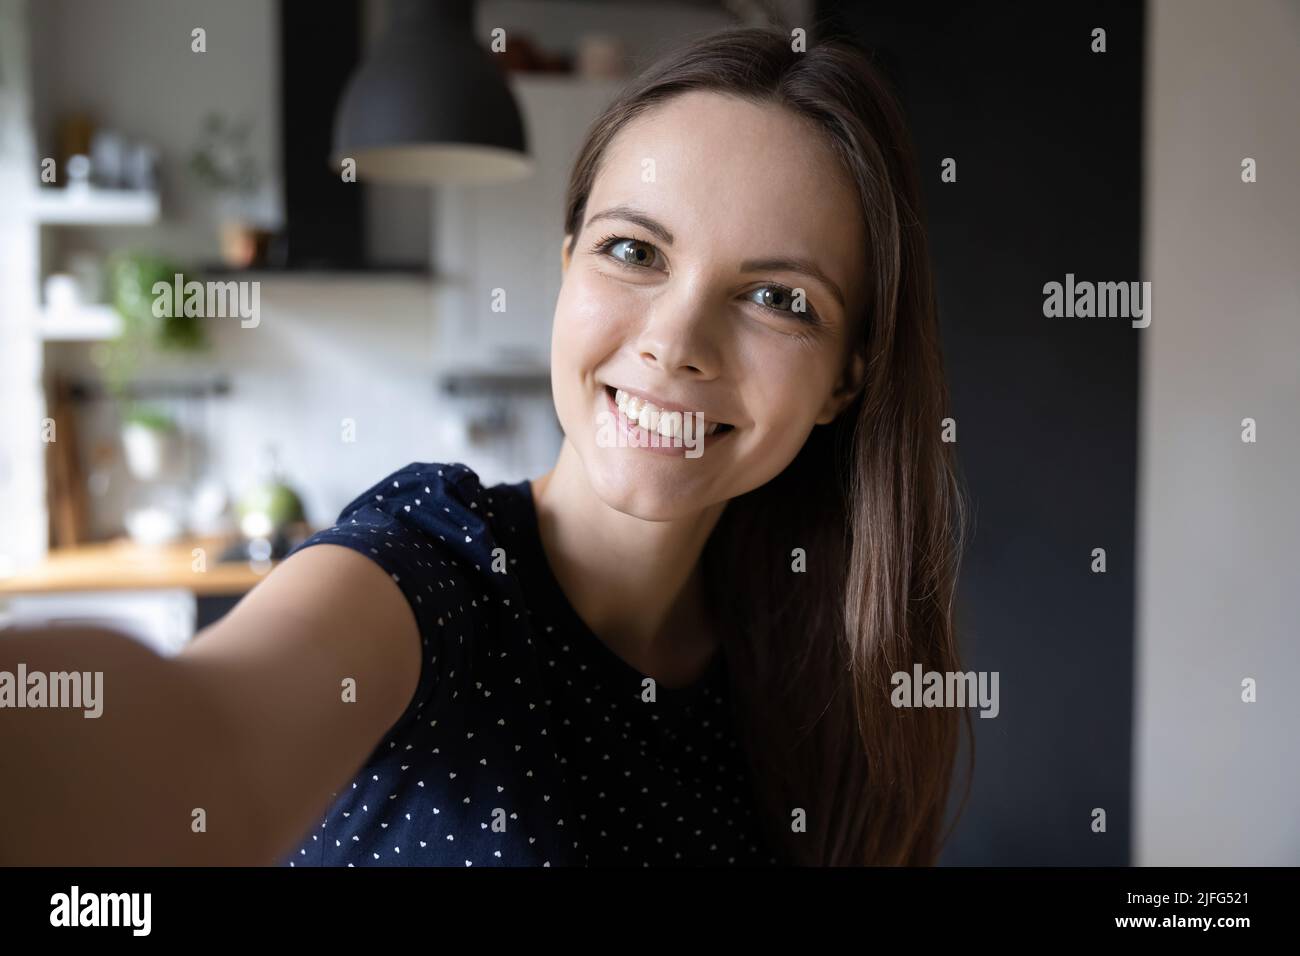 Selfie picture of happy beautiful young woman looking at camera Stock Photo